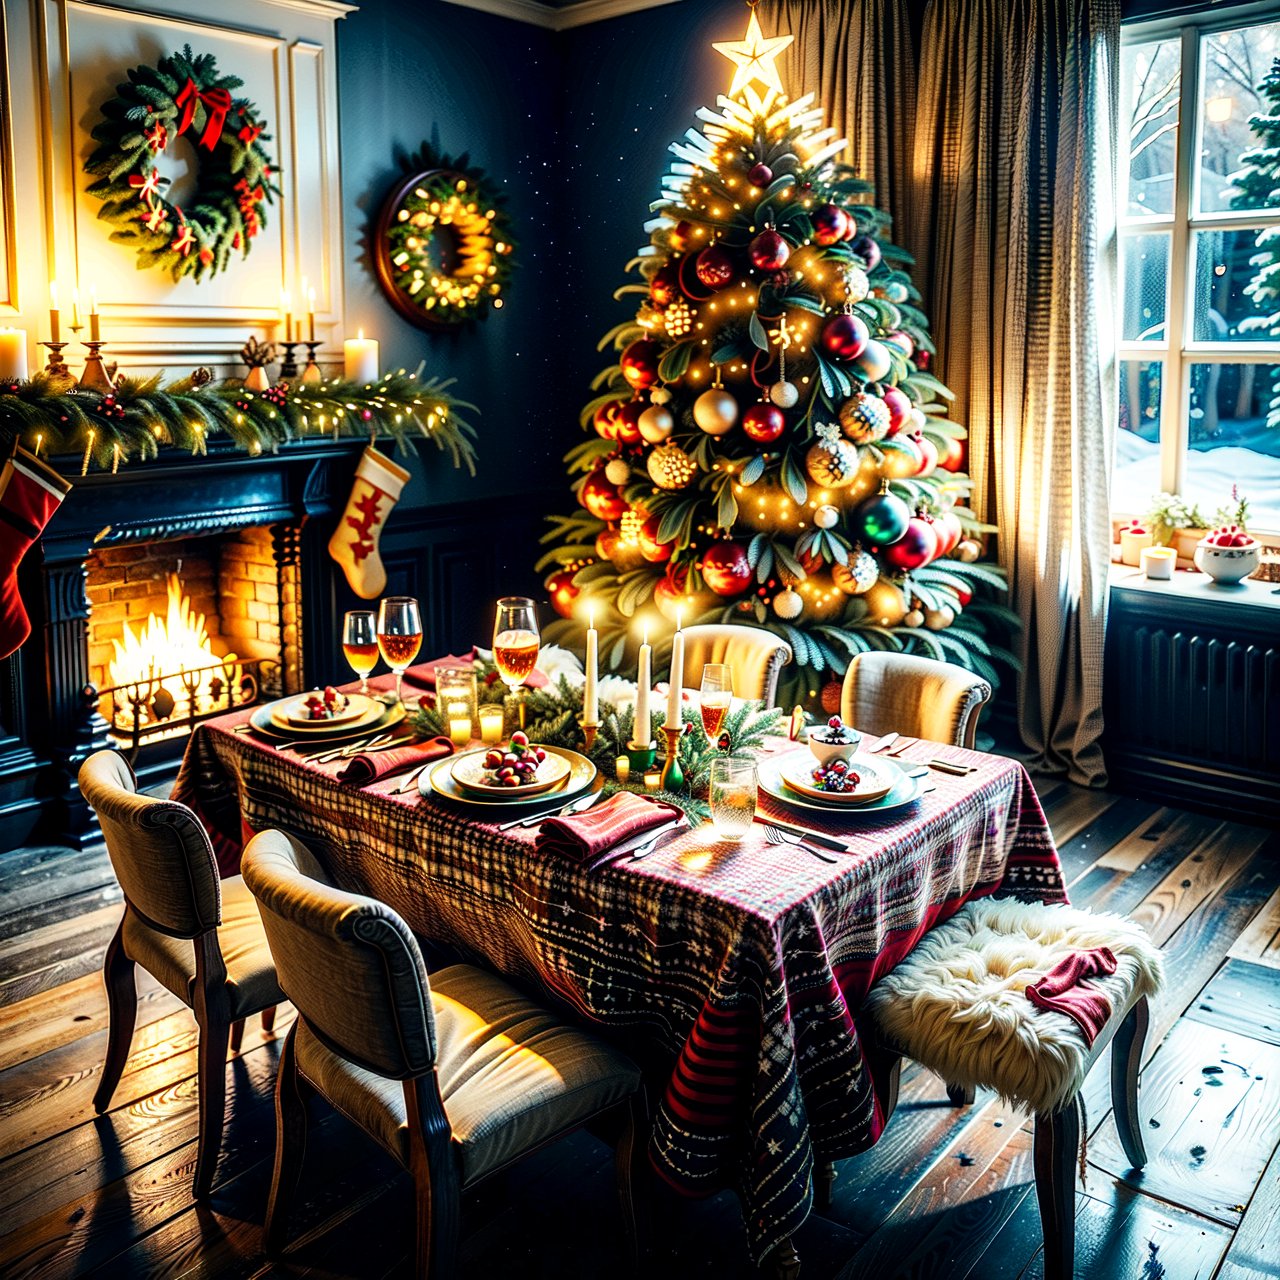 Christmas-themed room, The room is adorned with holiday decorations, creating a warm and inviting atmosphere. The dining table is the centerpiece, covered with a colorful tablecloth and laden with an array of Christmas foods, including a roast, various pies, and seasonal fruits. The highlight on the table is a large, artistically decorated Christmas tree-shaped cake. In the background, a beautifully decorated Christmas tree is illuminated with strings of lights, adding to the festive ambiance. Outside the window, the scene is enchanting with unique snowflake patterns gently falling, creating a picturesque winter wonderland. The overall scene encapsulates the joy and warmth of the Christmas season, 